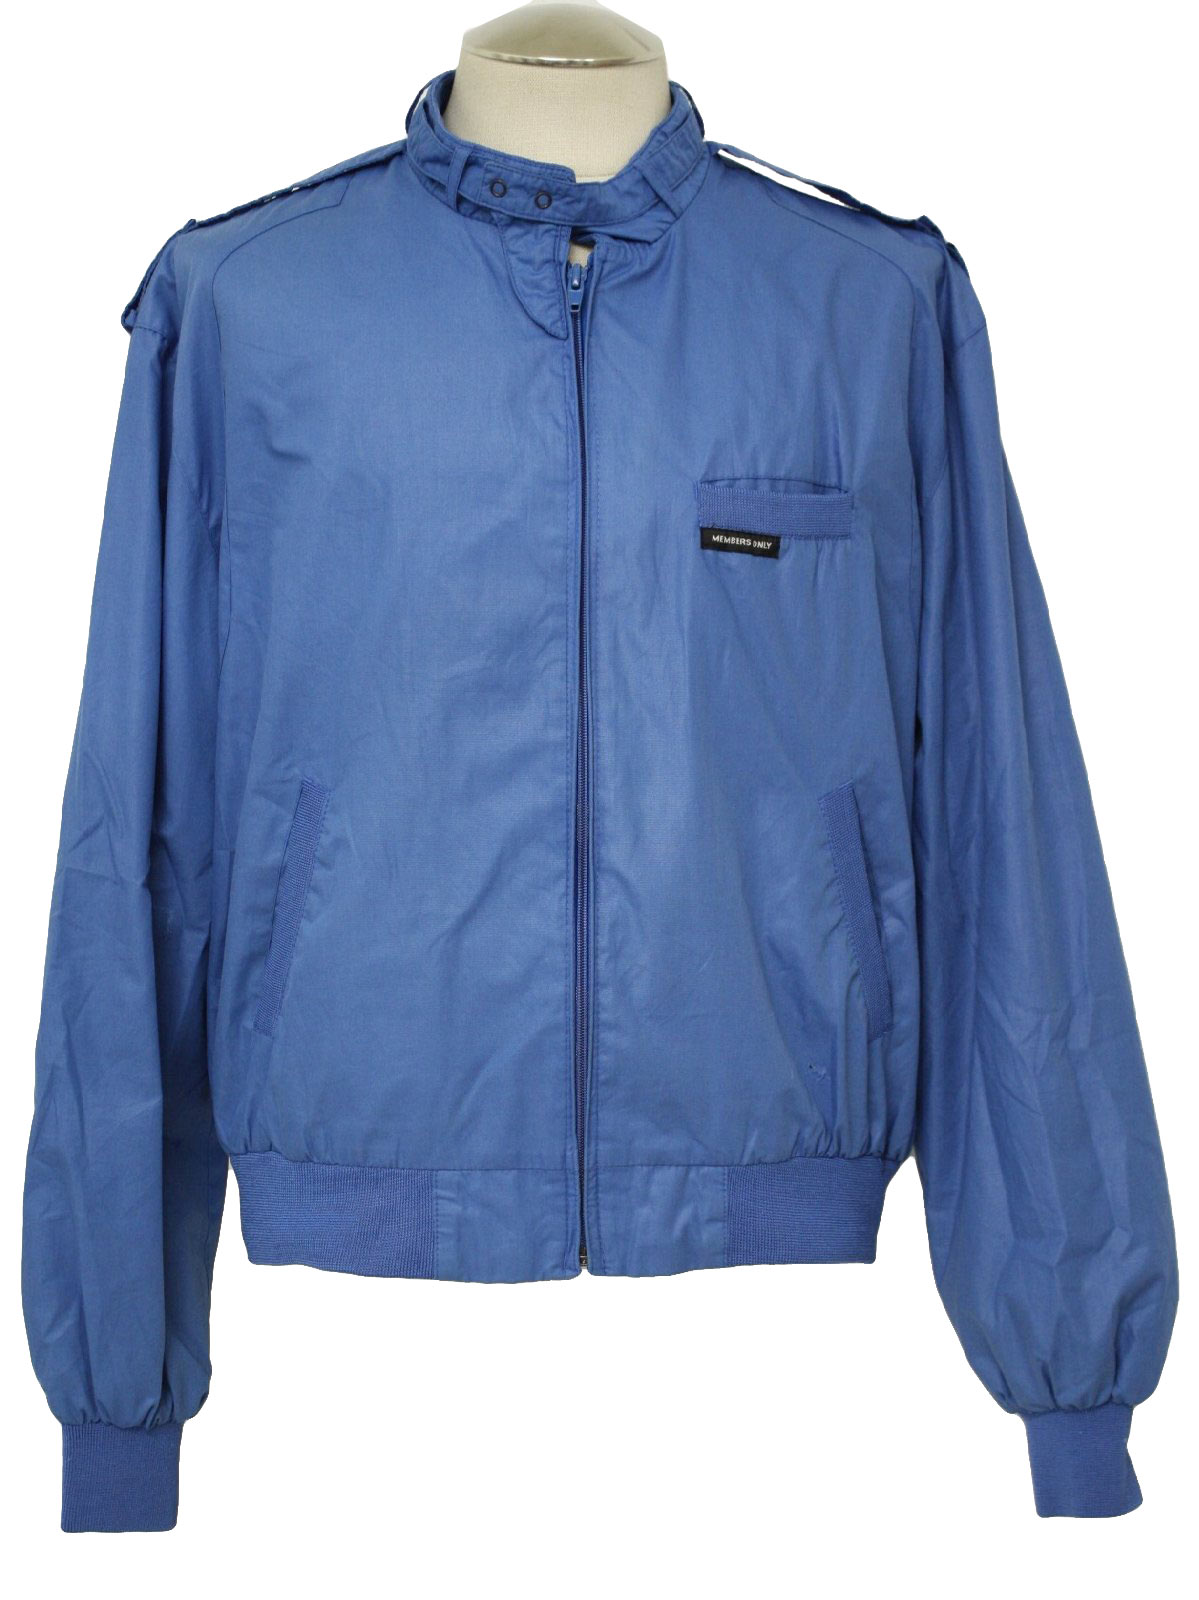 1980s Members Only Jacket: 80s -Members Only- Mens sky blue cotton ...